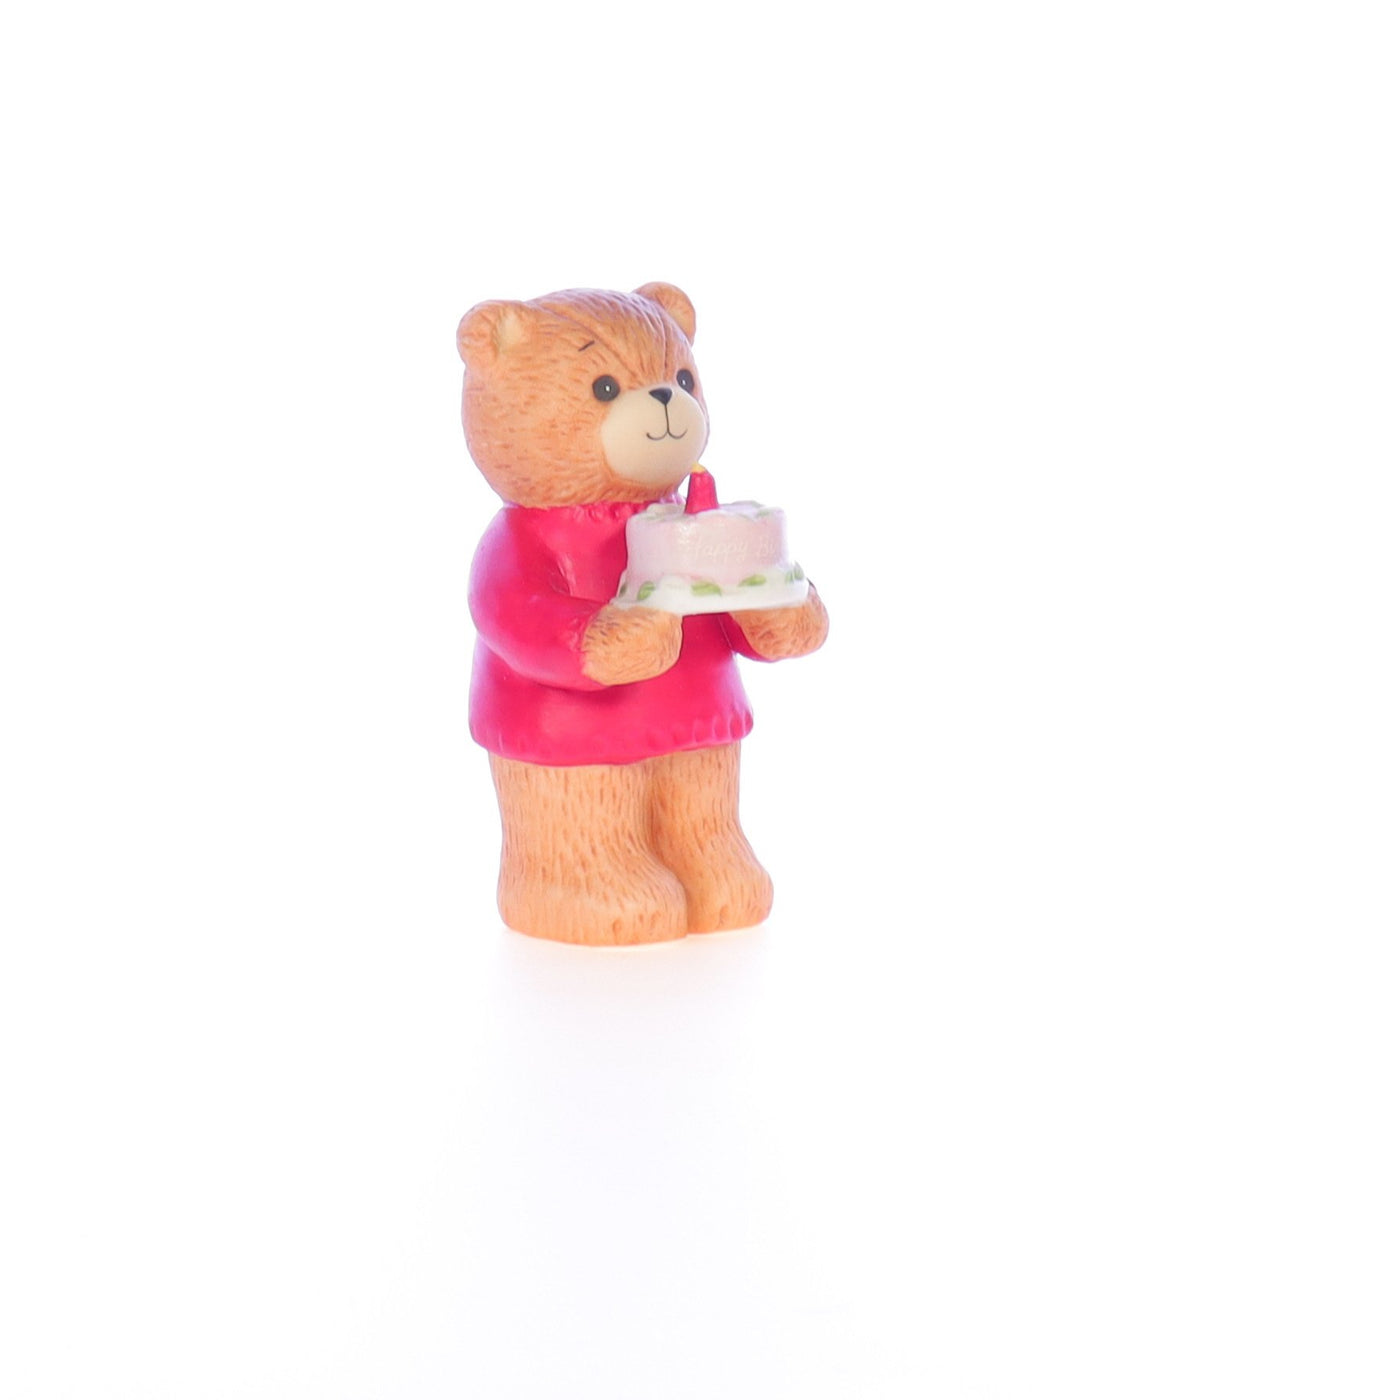 Lucy_And_Me_by_Lucy_Atwell_Porcelain_Figurine_Bear_Holding_Birthday_Cake_Age_1_Lucy_Unknown_030_08